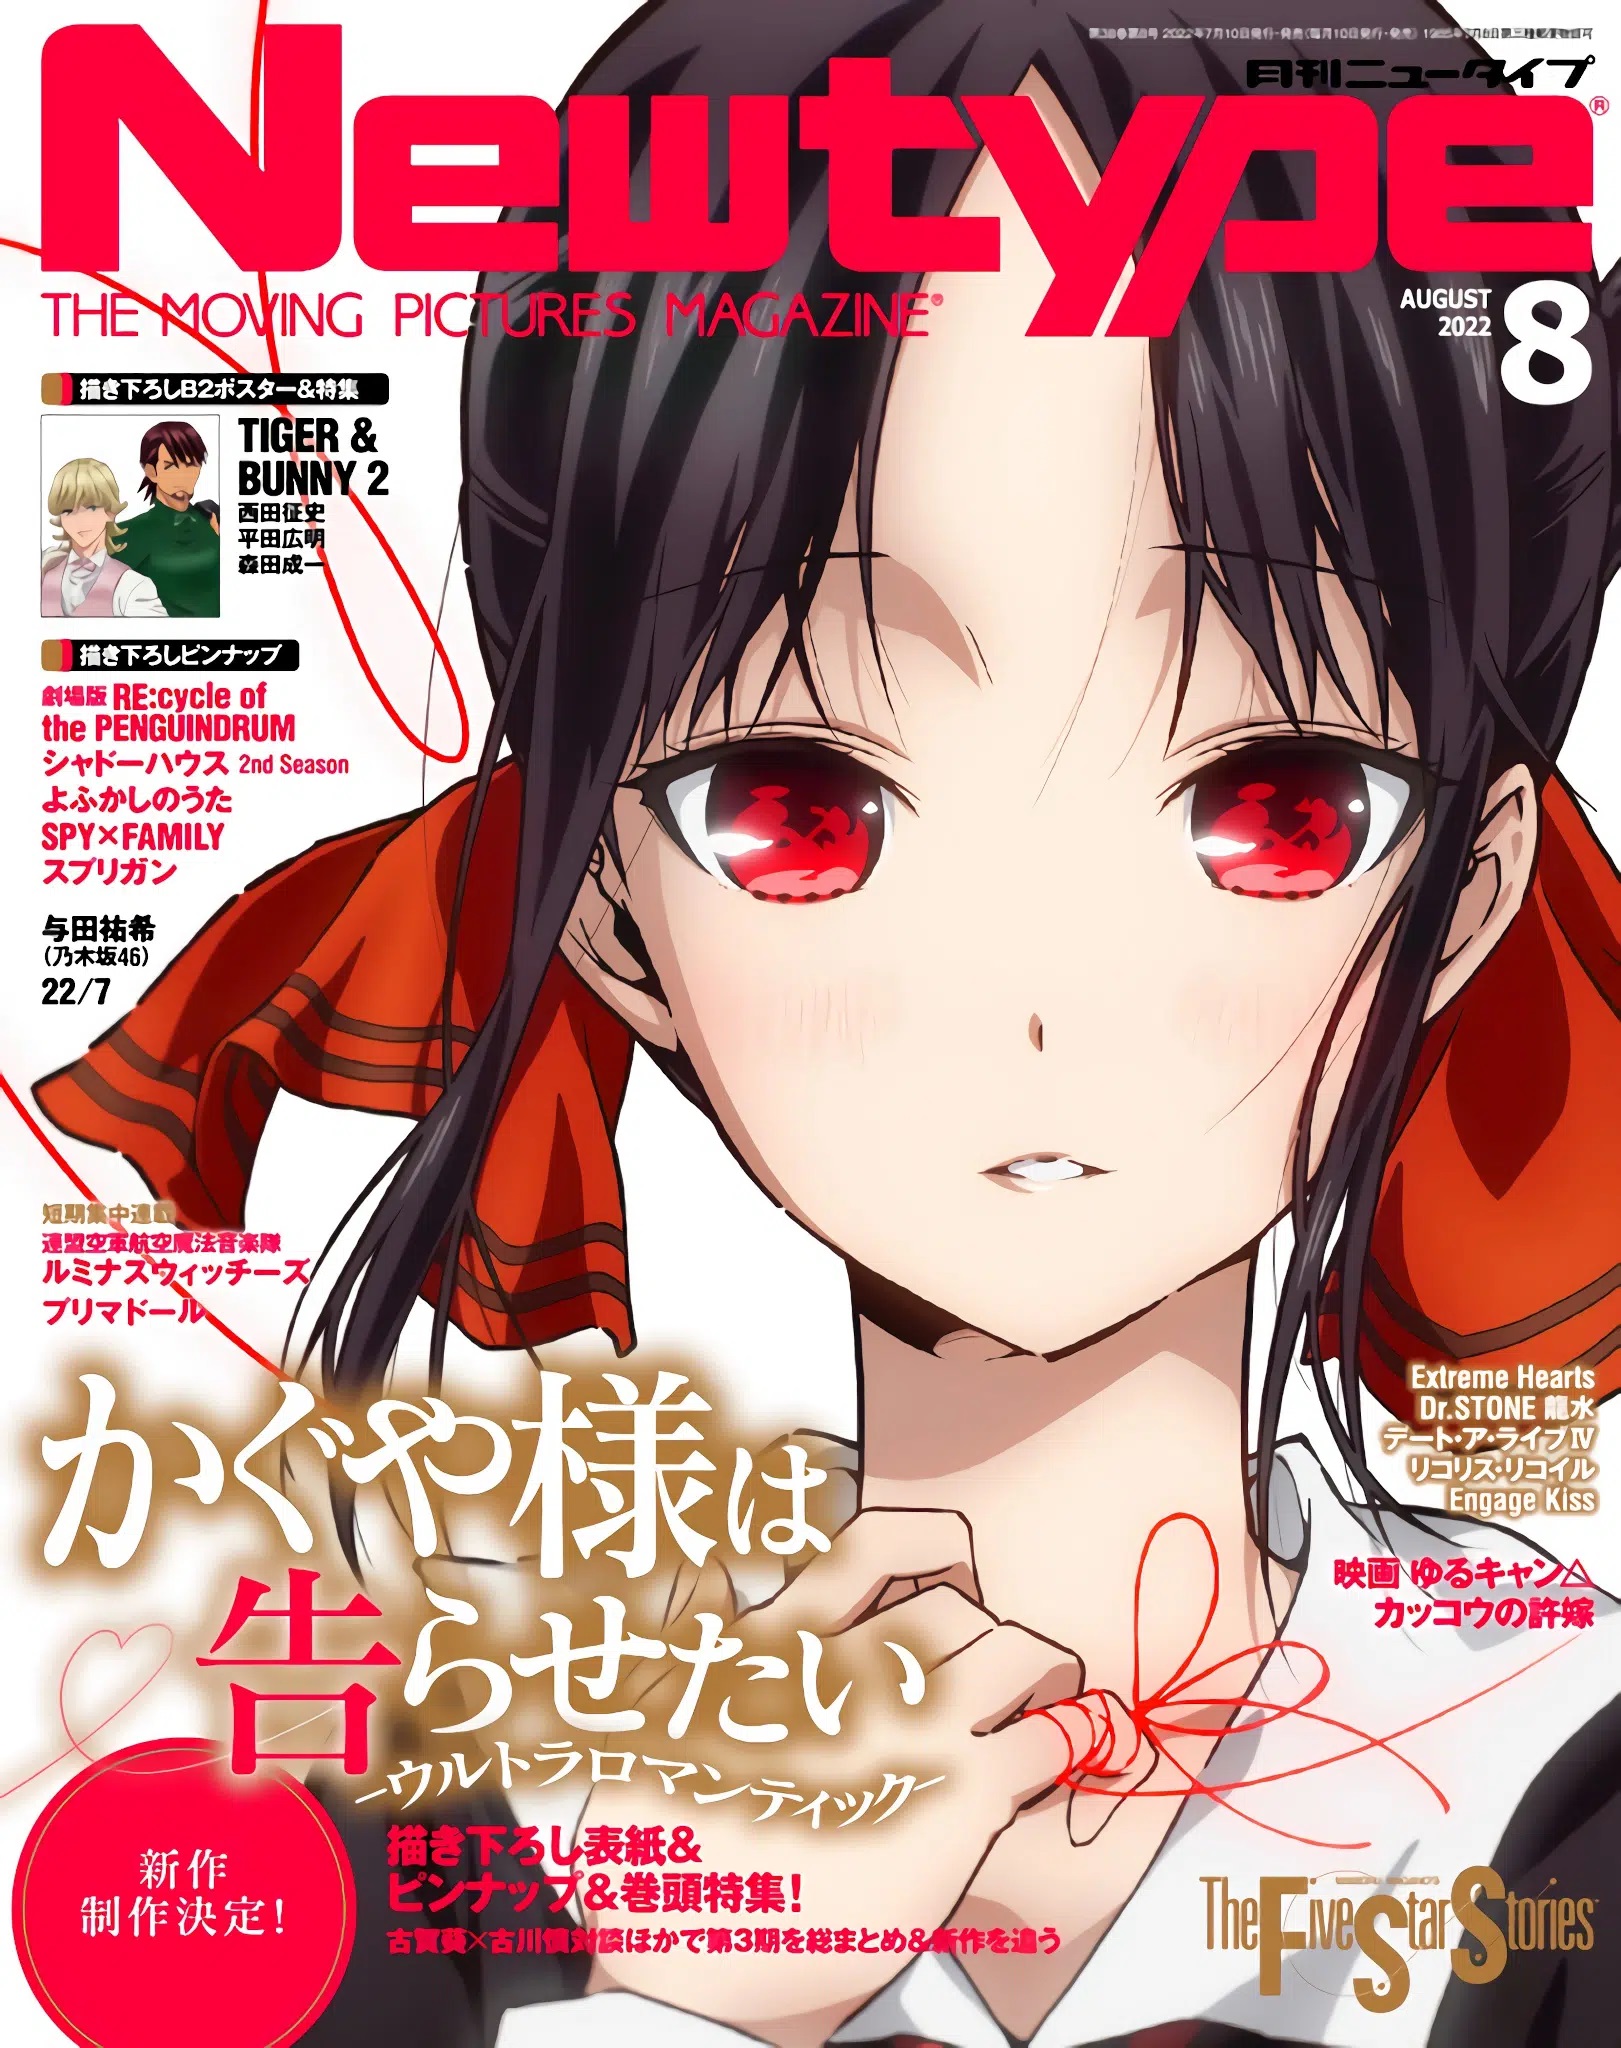 Kaguya-sama: Love Is War — The First Kiss Never Ends Confirmed To